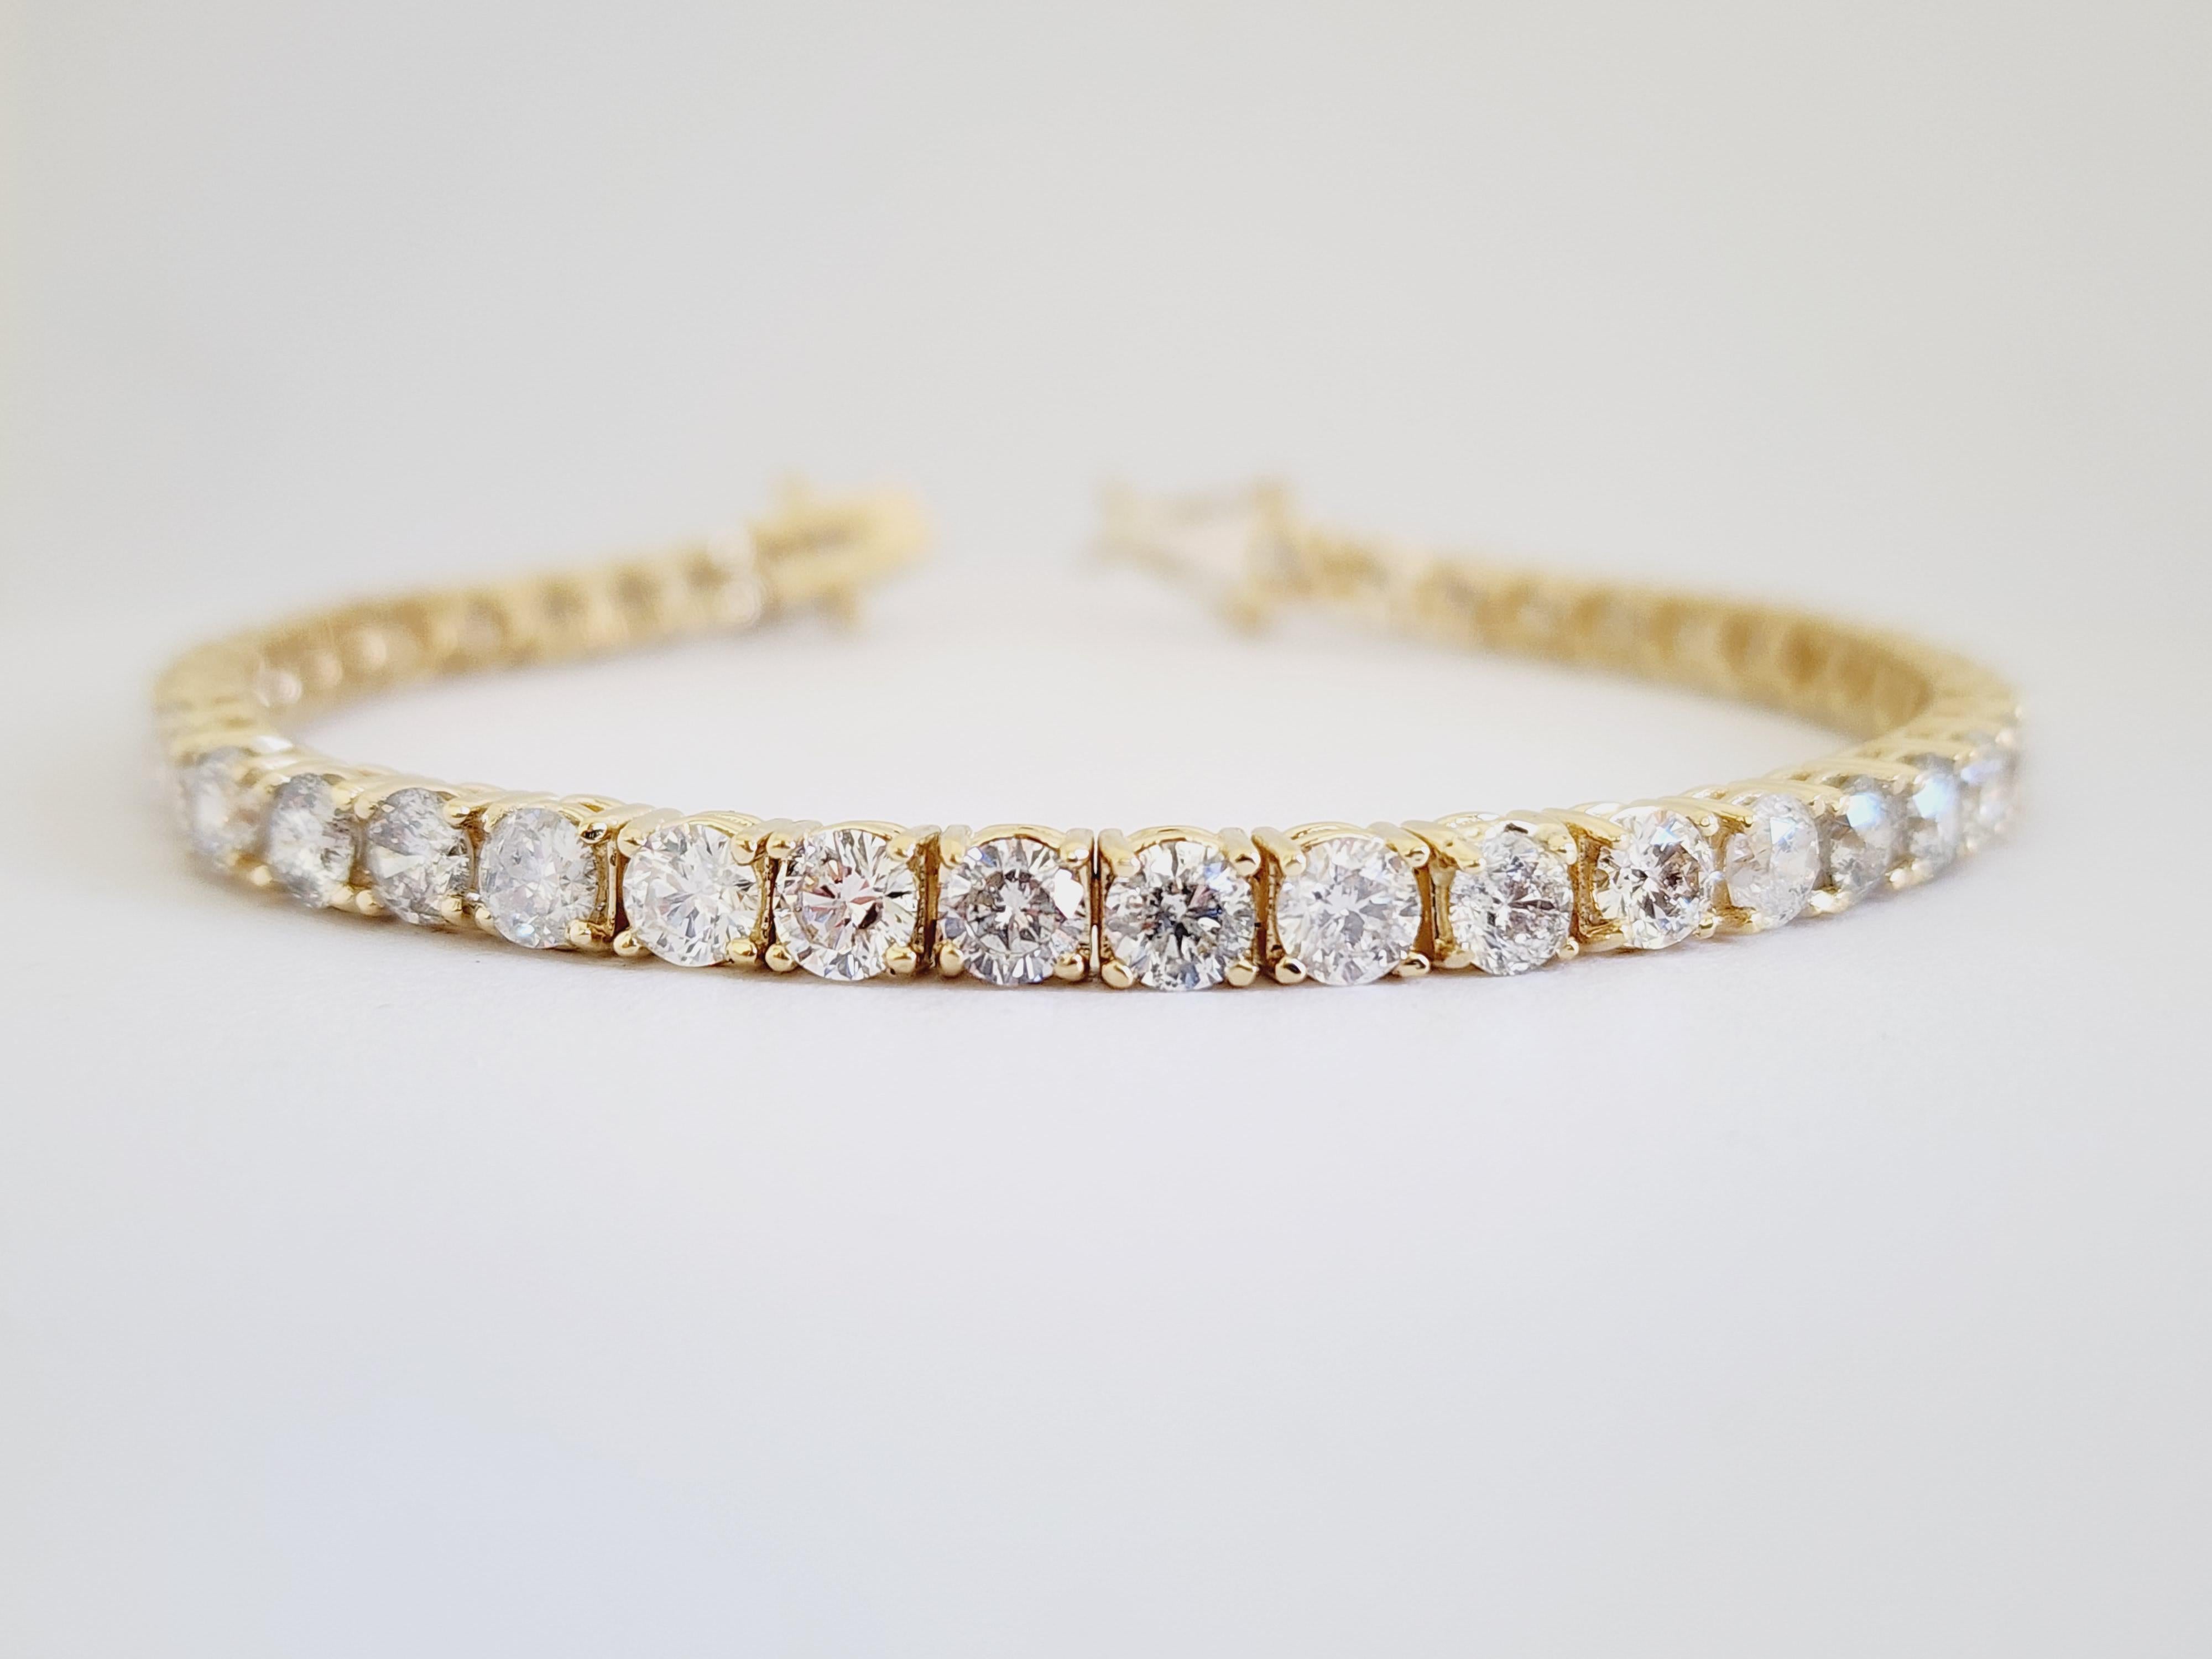 9.75 Carat Natural diamonds tennis bracelet round-brilliant cut  14k yellow gold. 
7 inch. Average Color F-G, Clarity SI-I. 3.9 mm wide. Very Shiny.